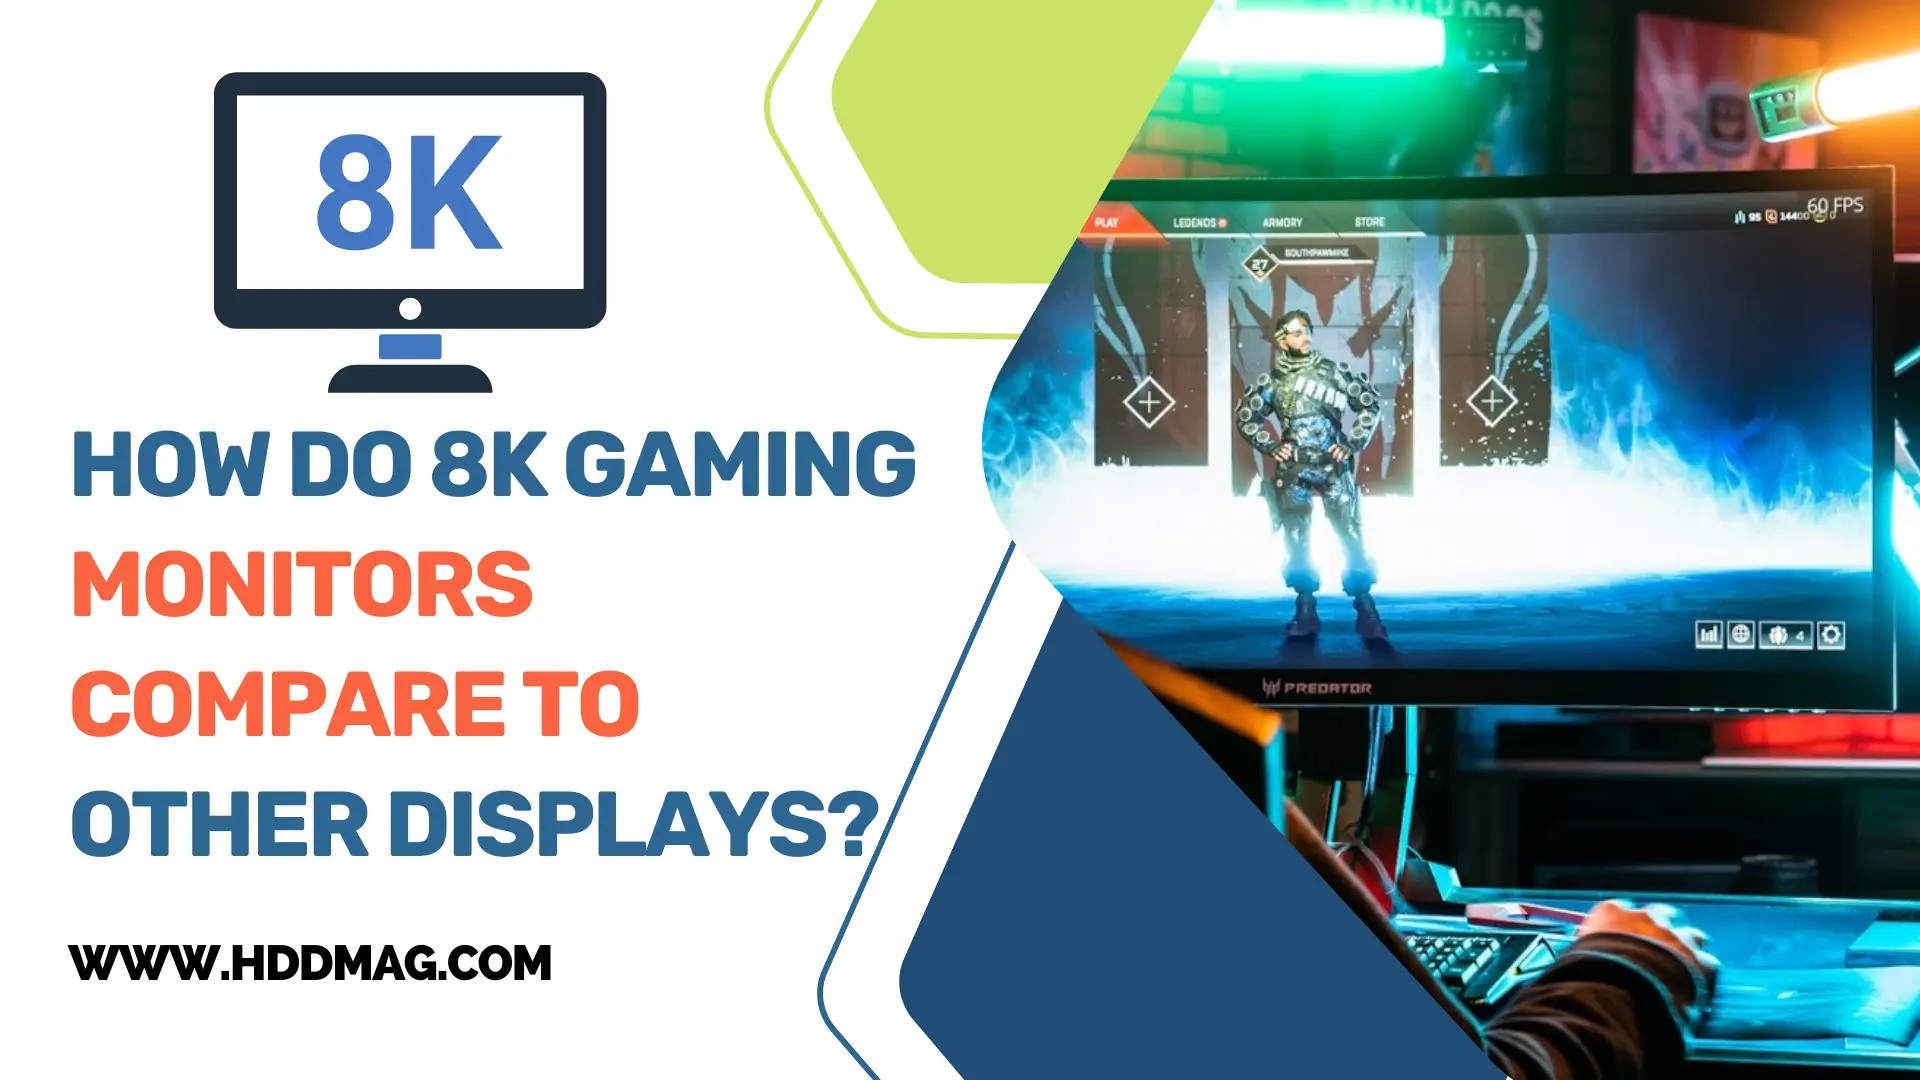 How Do 8K Gaming Monitors Compare to Other Displays?